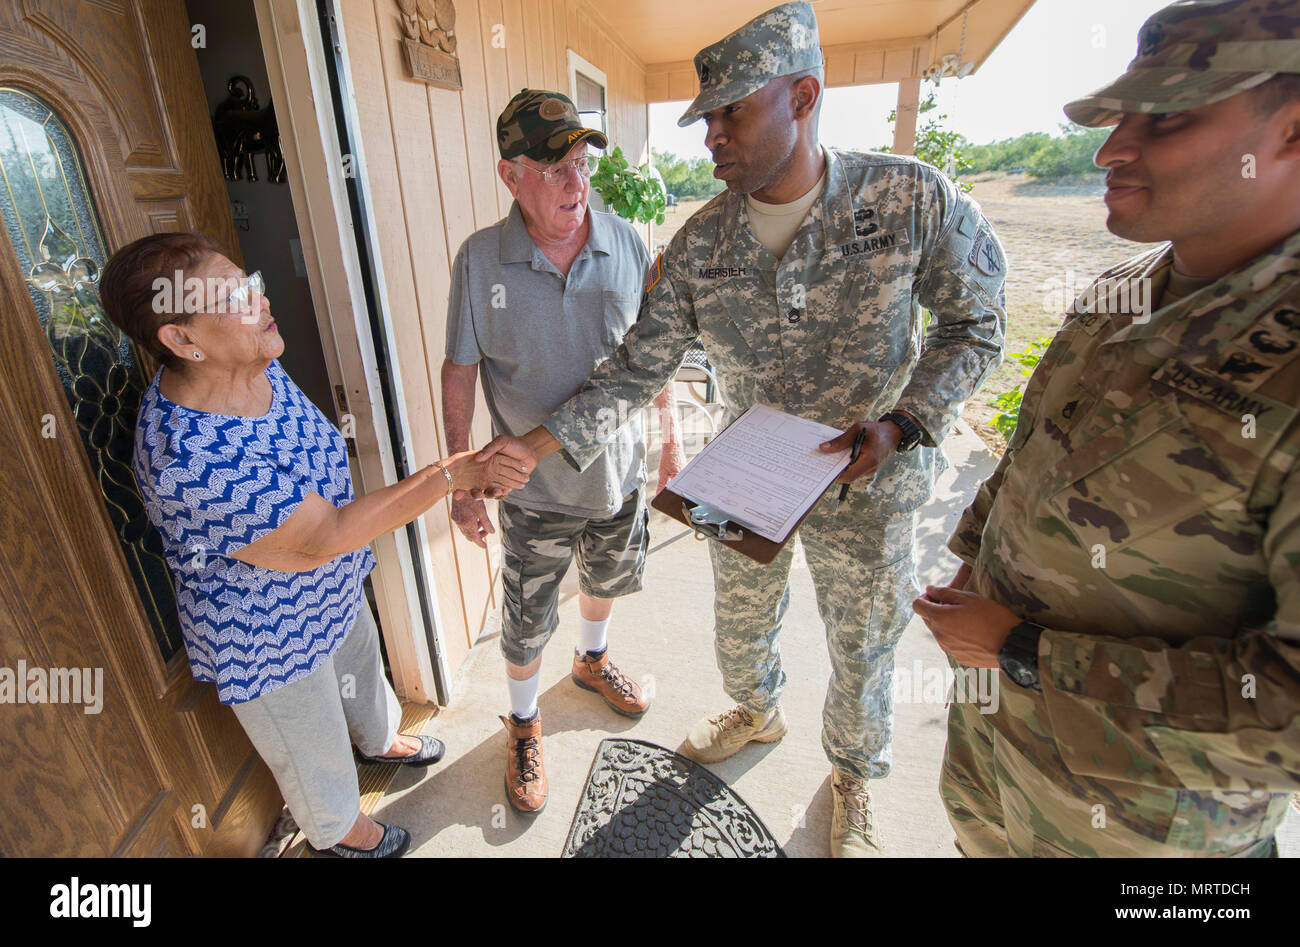 Sgt. 1st Class Rhody Merisier, middle right, and Staff Sgt. Aldo Blanco, both assigned to the 478th Civil Affairs Battalion based in Miami, conduct a survey with residents of a colonia currently without potable water near Laredo, Texas, June 23, 2017. Nearly 200 Reserve Soldiers are participating in an Innovative Readiness Training mission to improve infrastructures in colonias along the Texas-Mexico border. (Photo Credit: Sean Kimmons) Stock Photo